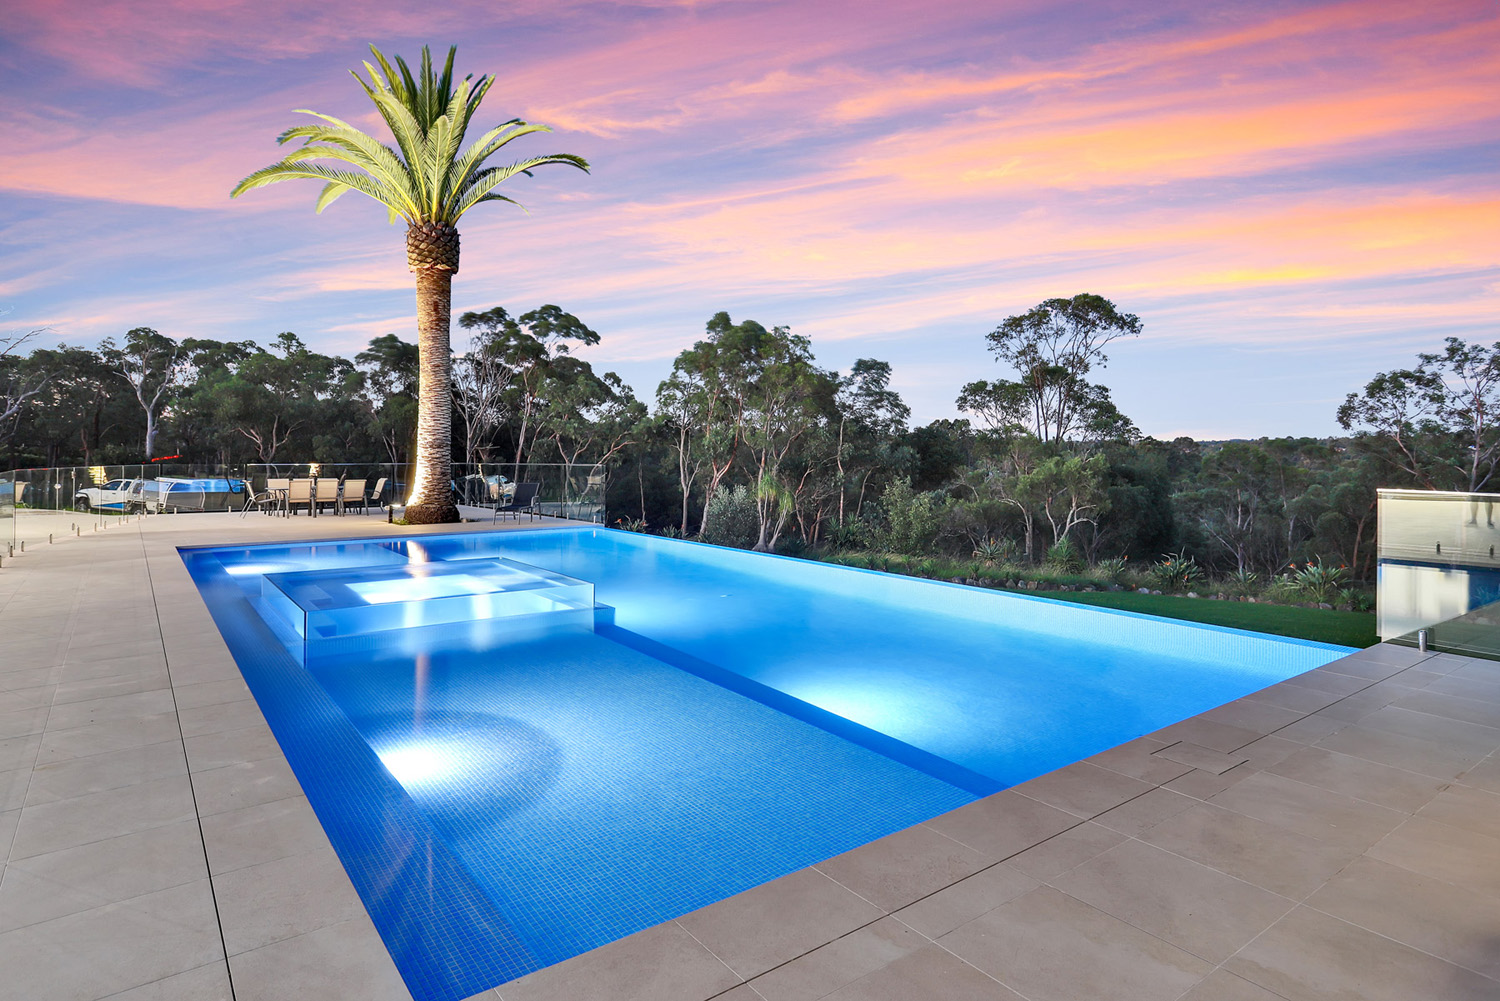 How to Read Your New Pool Contract to Avoid Surprises